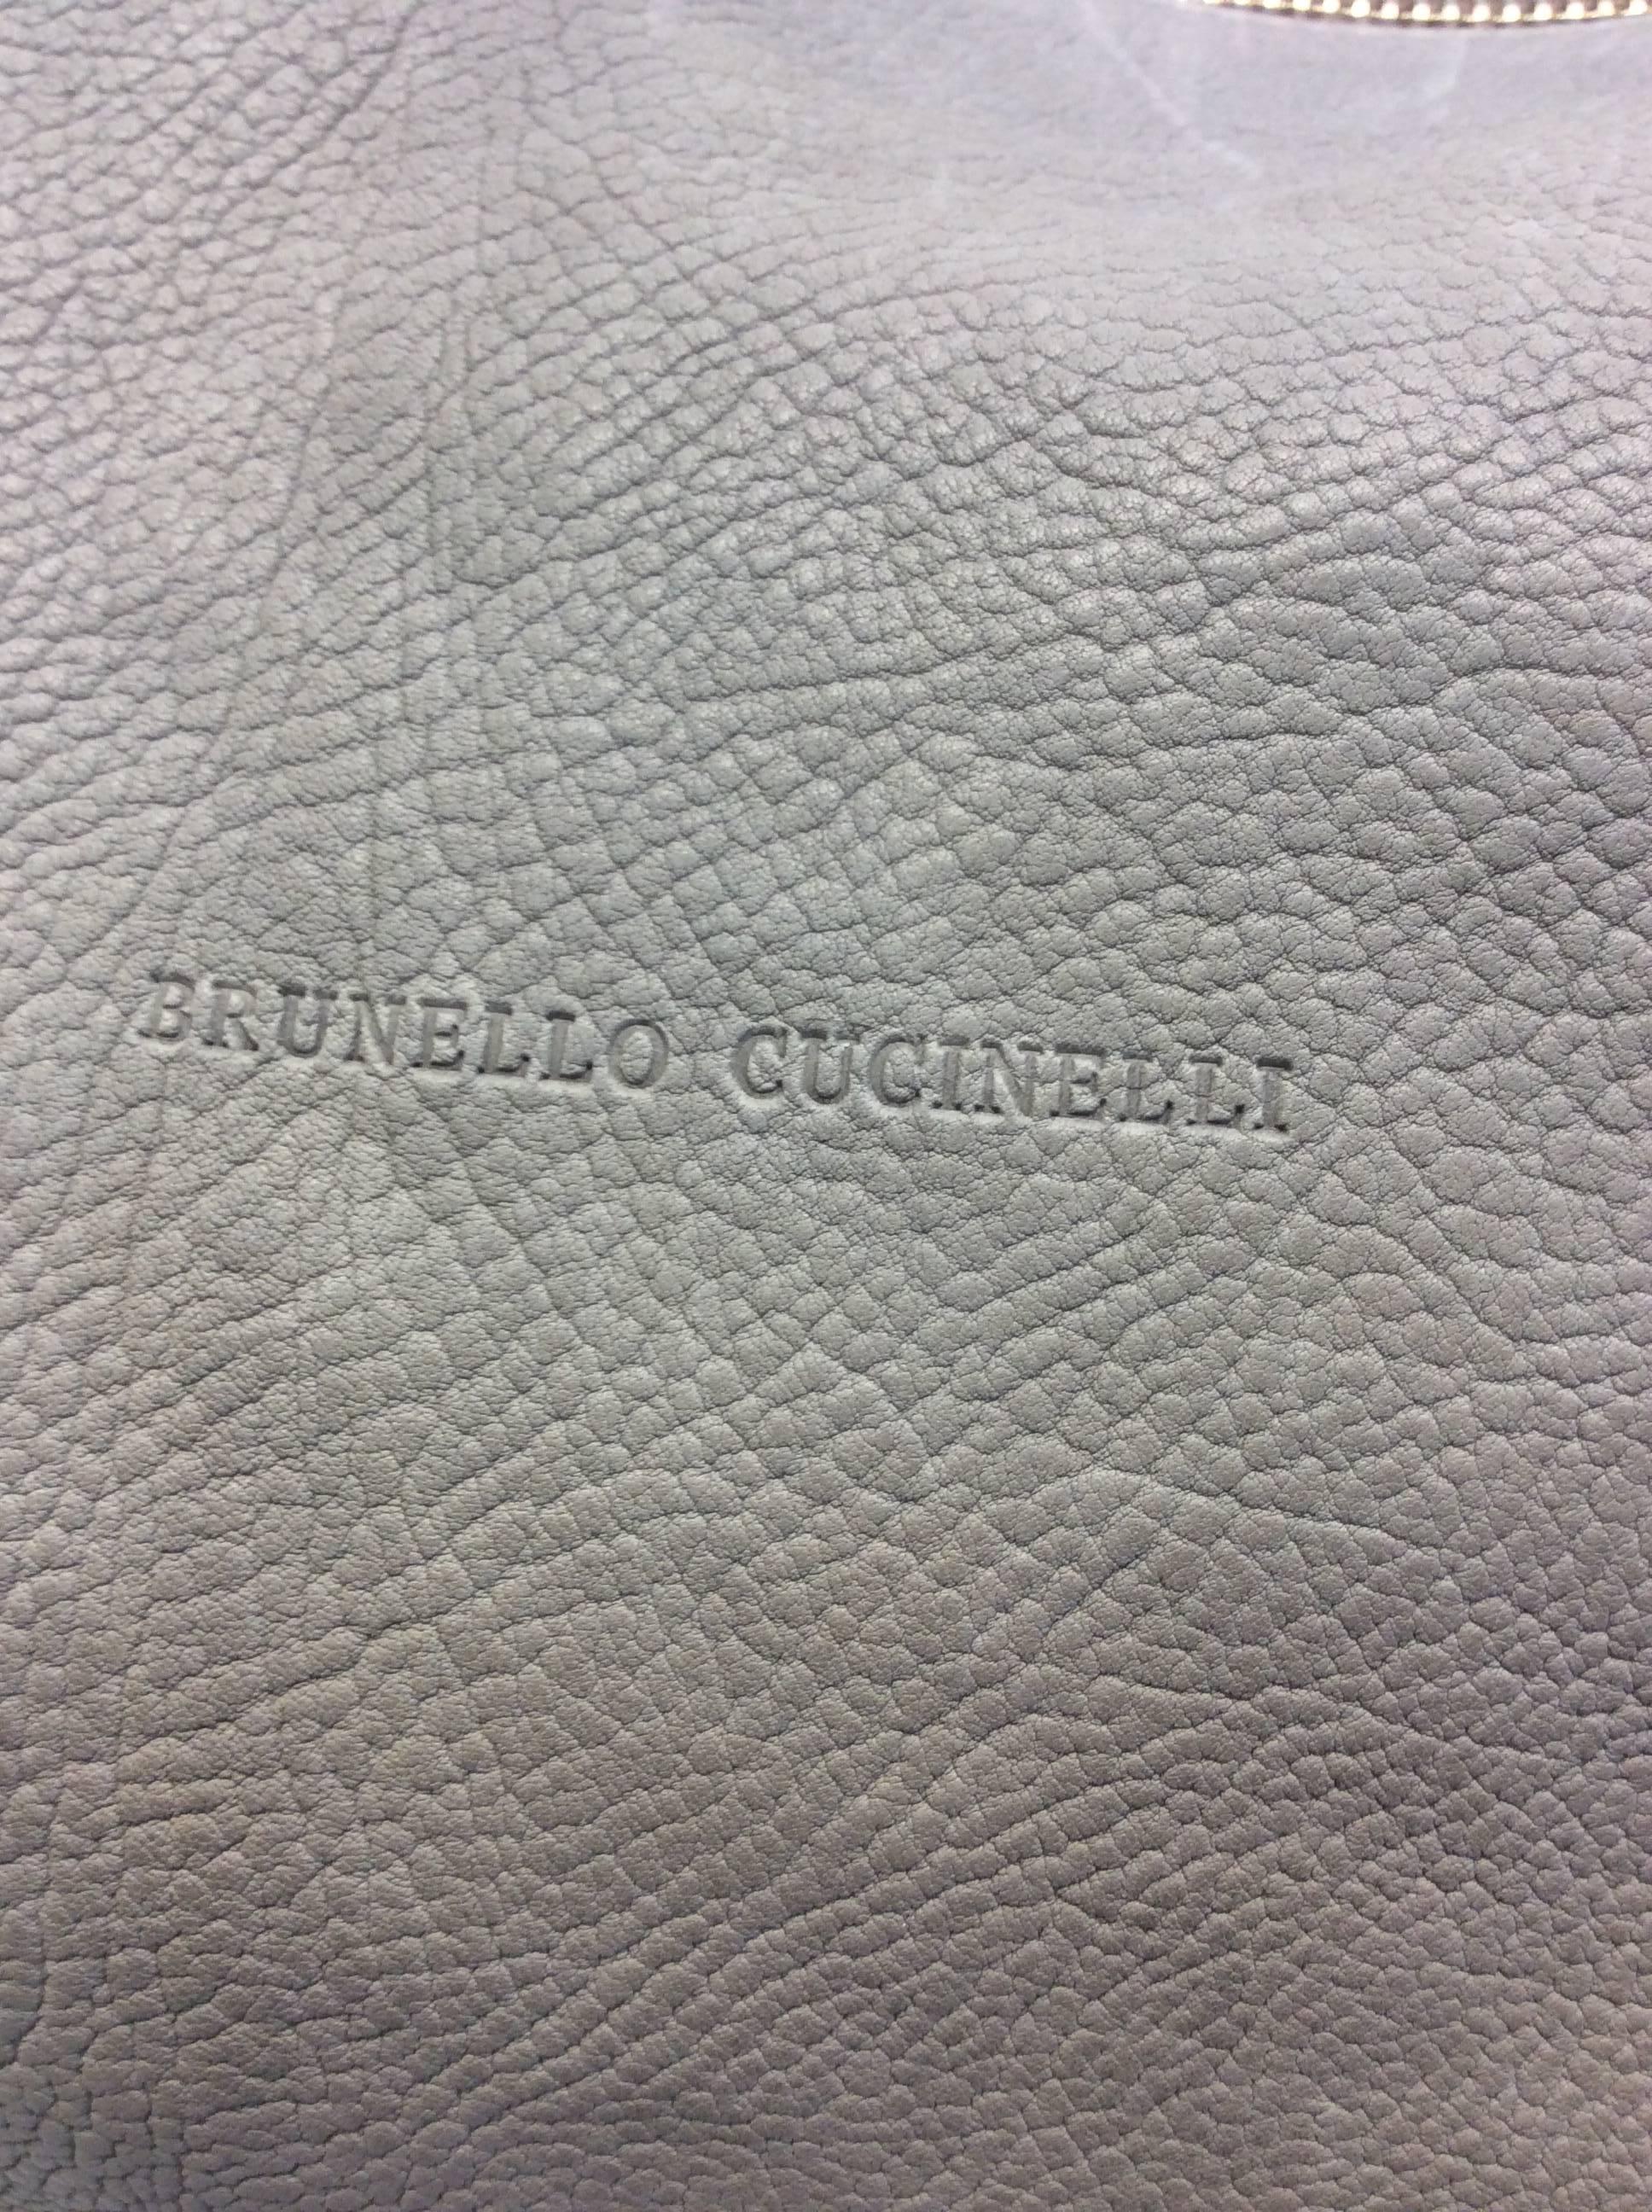 Brunello Cucinelli Taupe Leather Bag For Sale 1